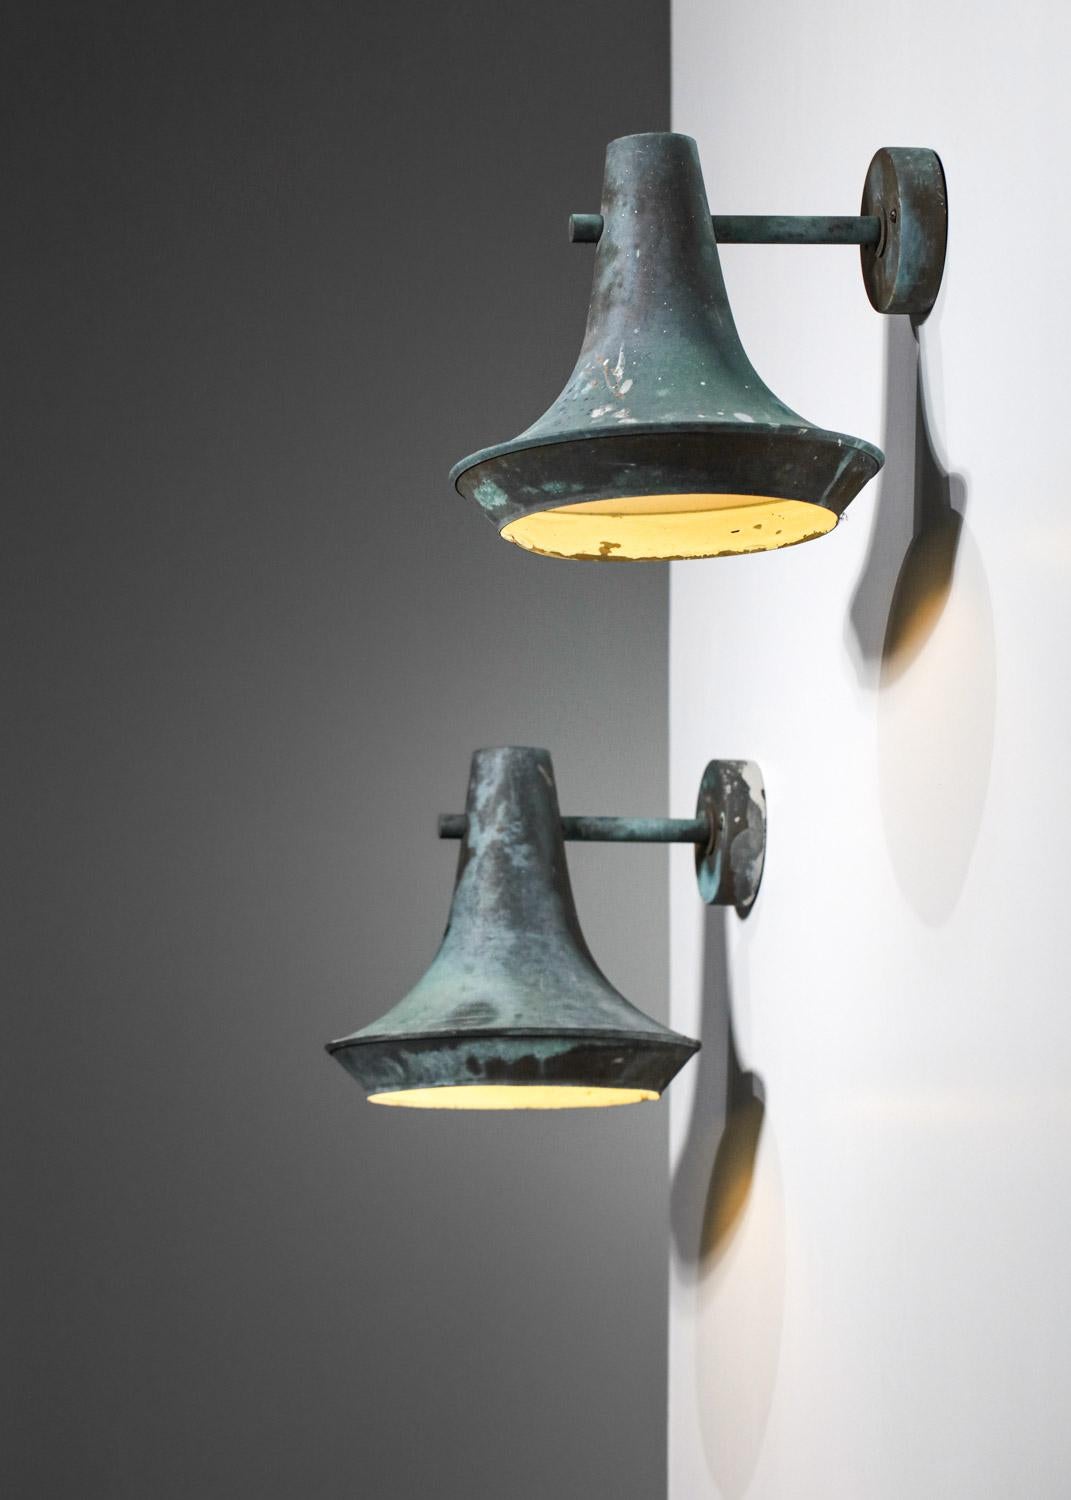 Large Pair of Swedish Copper Wall Lamps Attributed to Hans Agne Jakobsson Patina 6